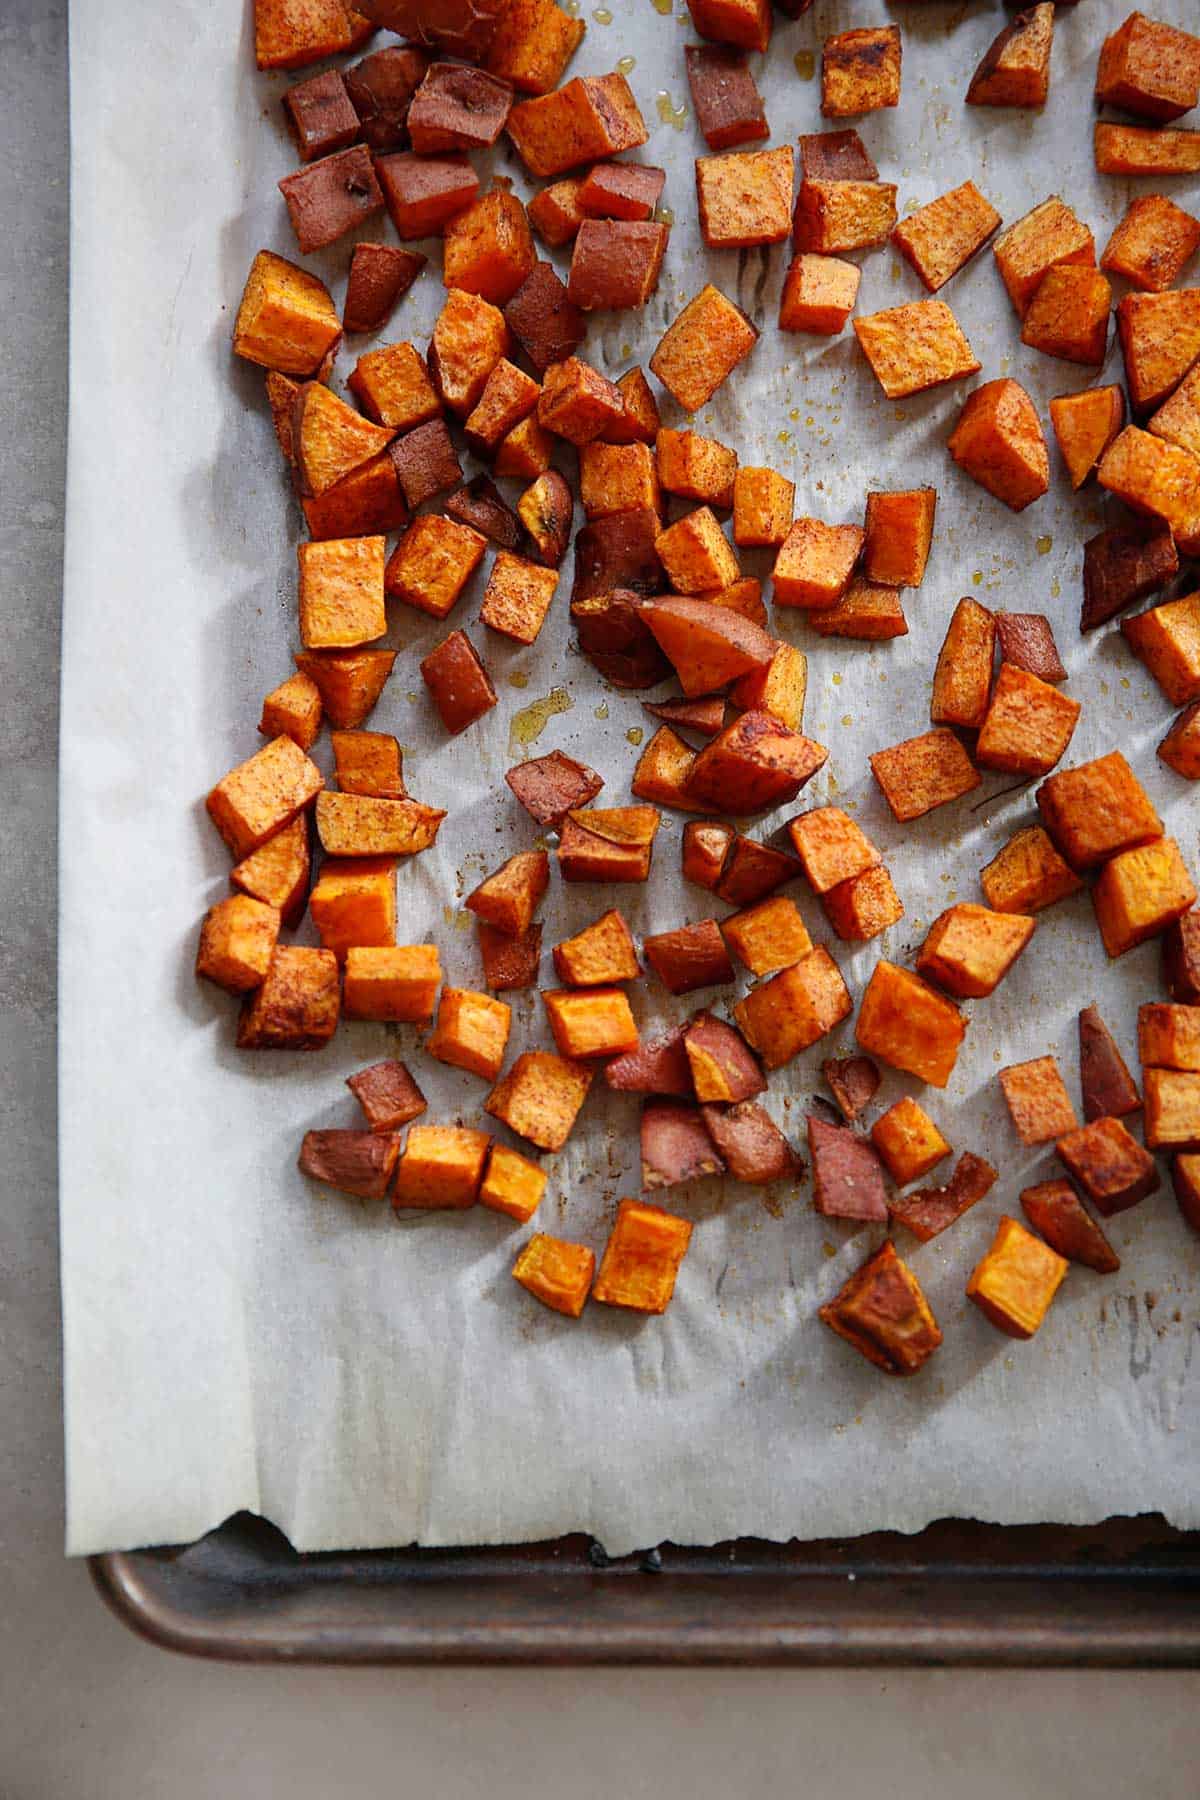 sweet potatoes cubed on a sweet pan ready to eat